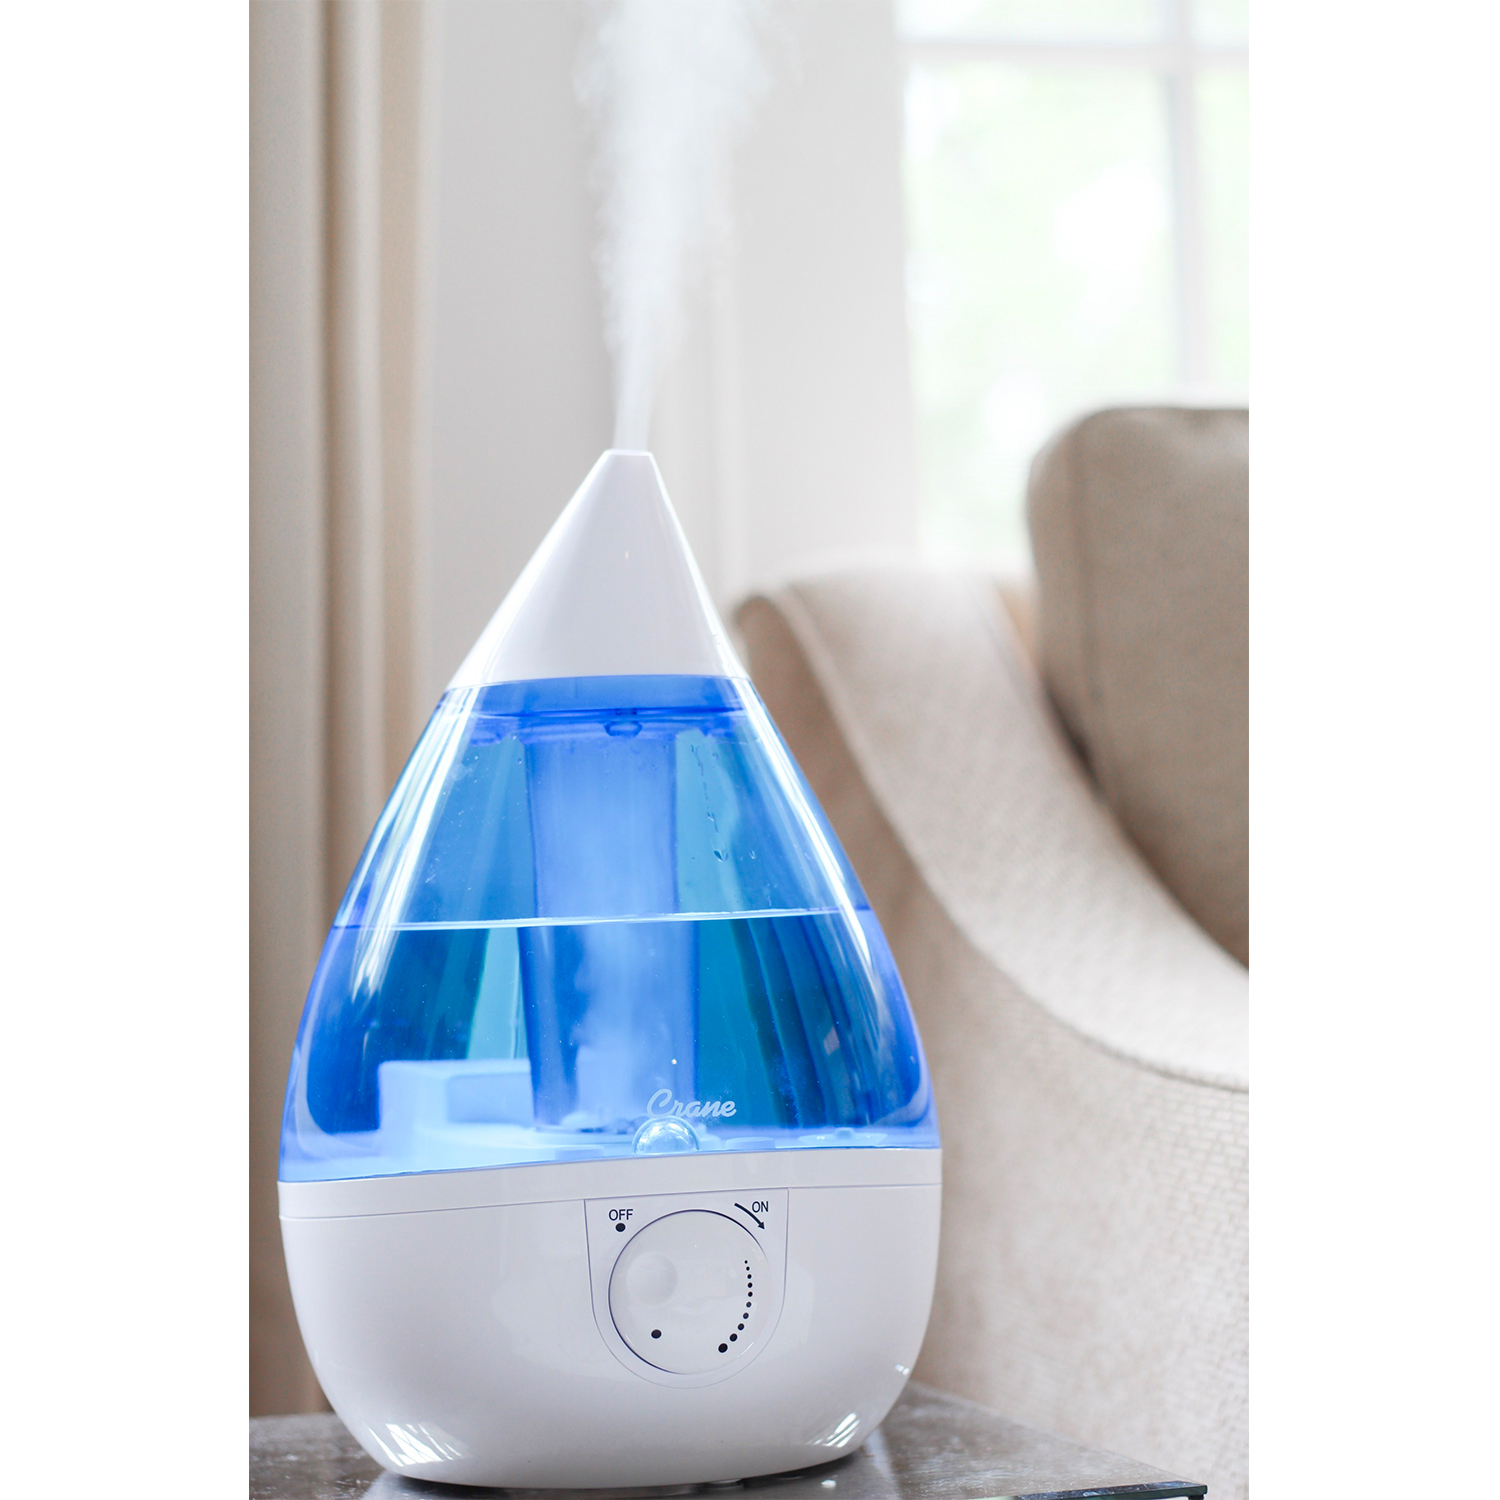 When should I use humidifier for baby?